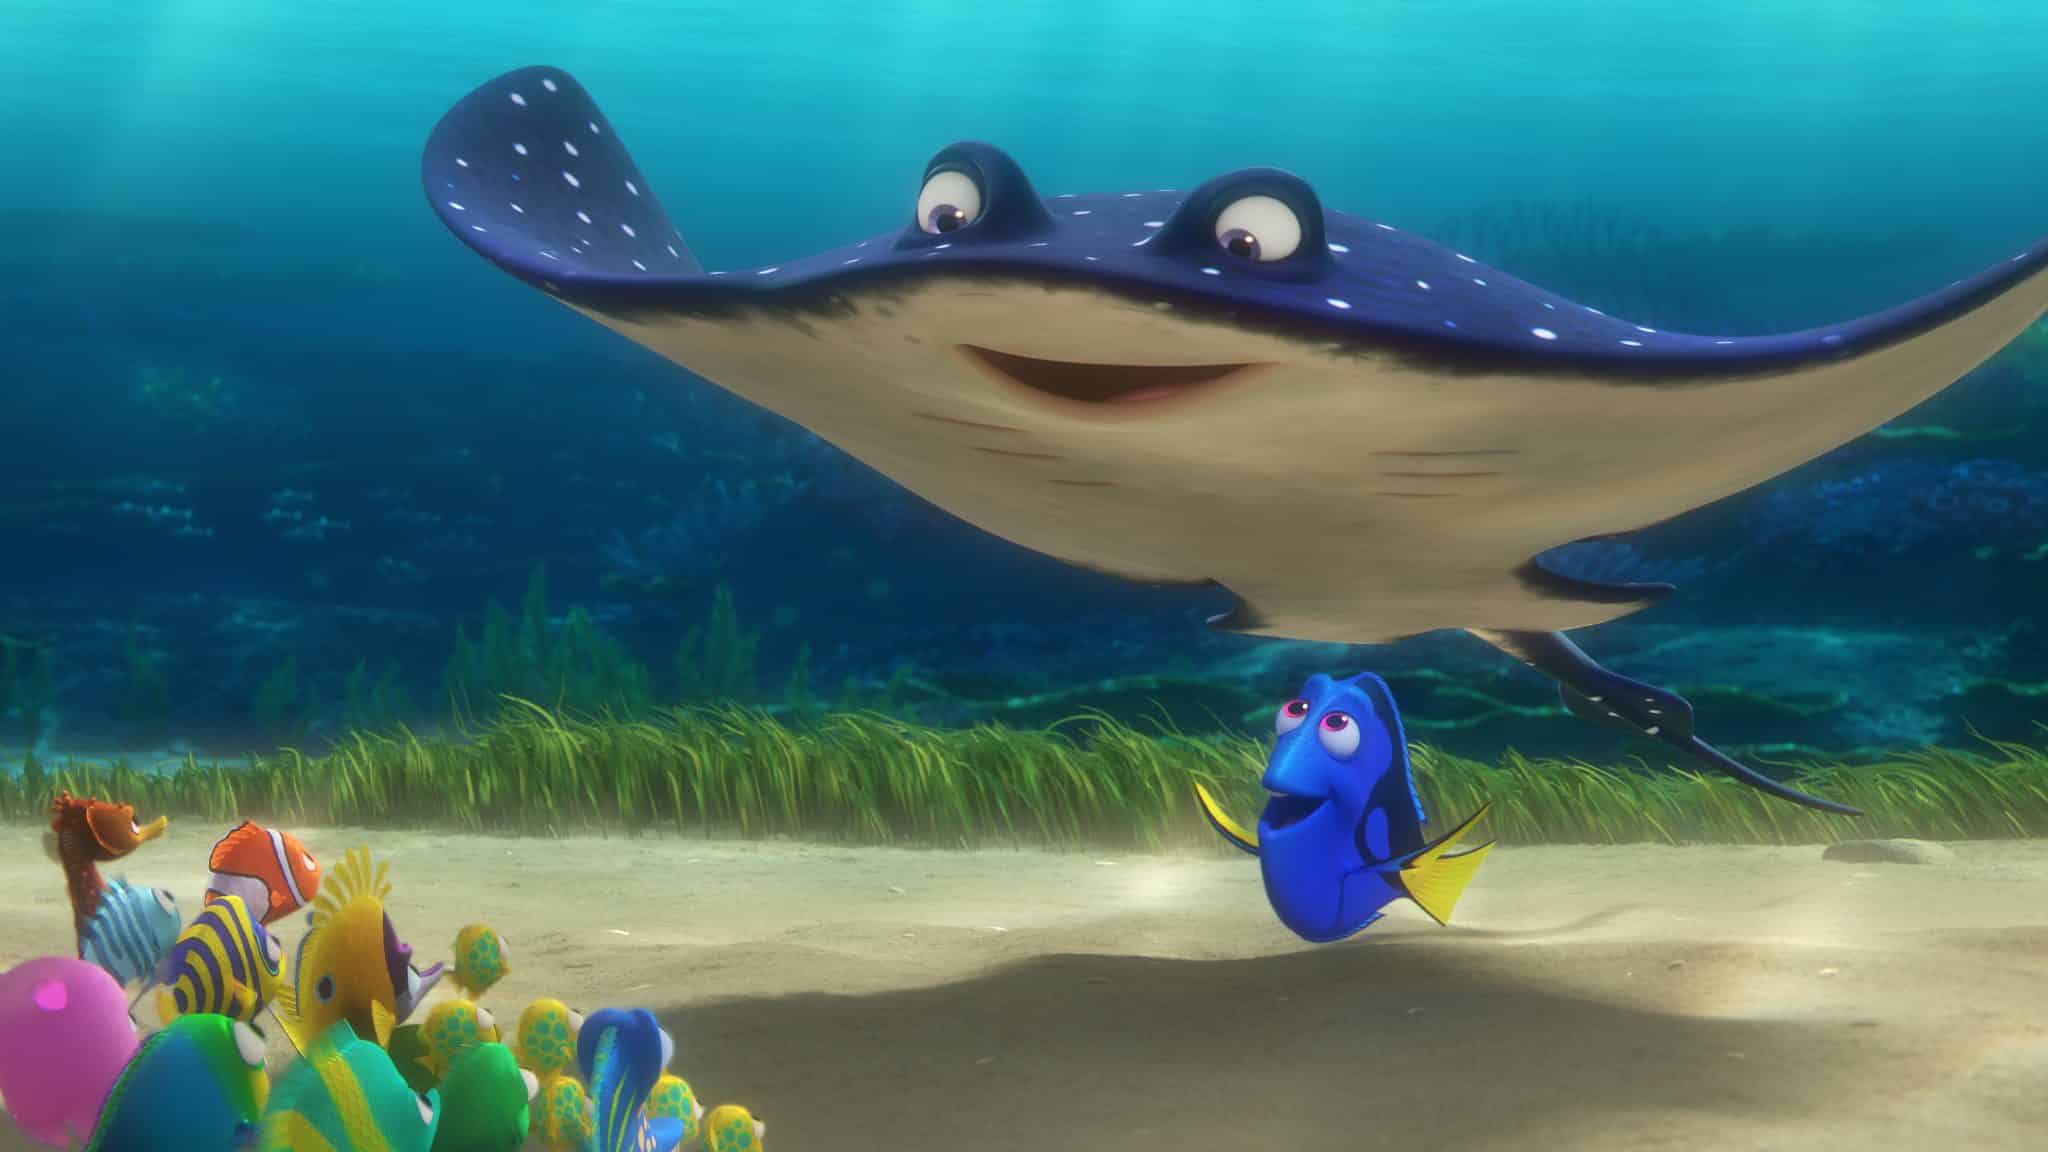 FINDING DORY. ©2016 Disney•Pixar. All Rights Reserved.